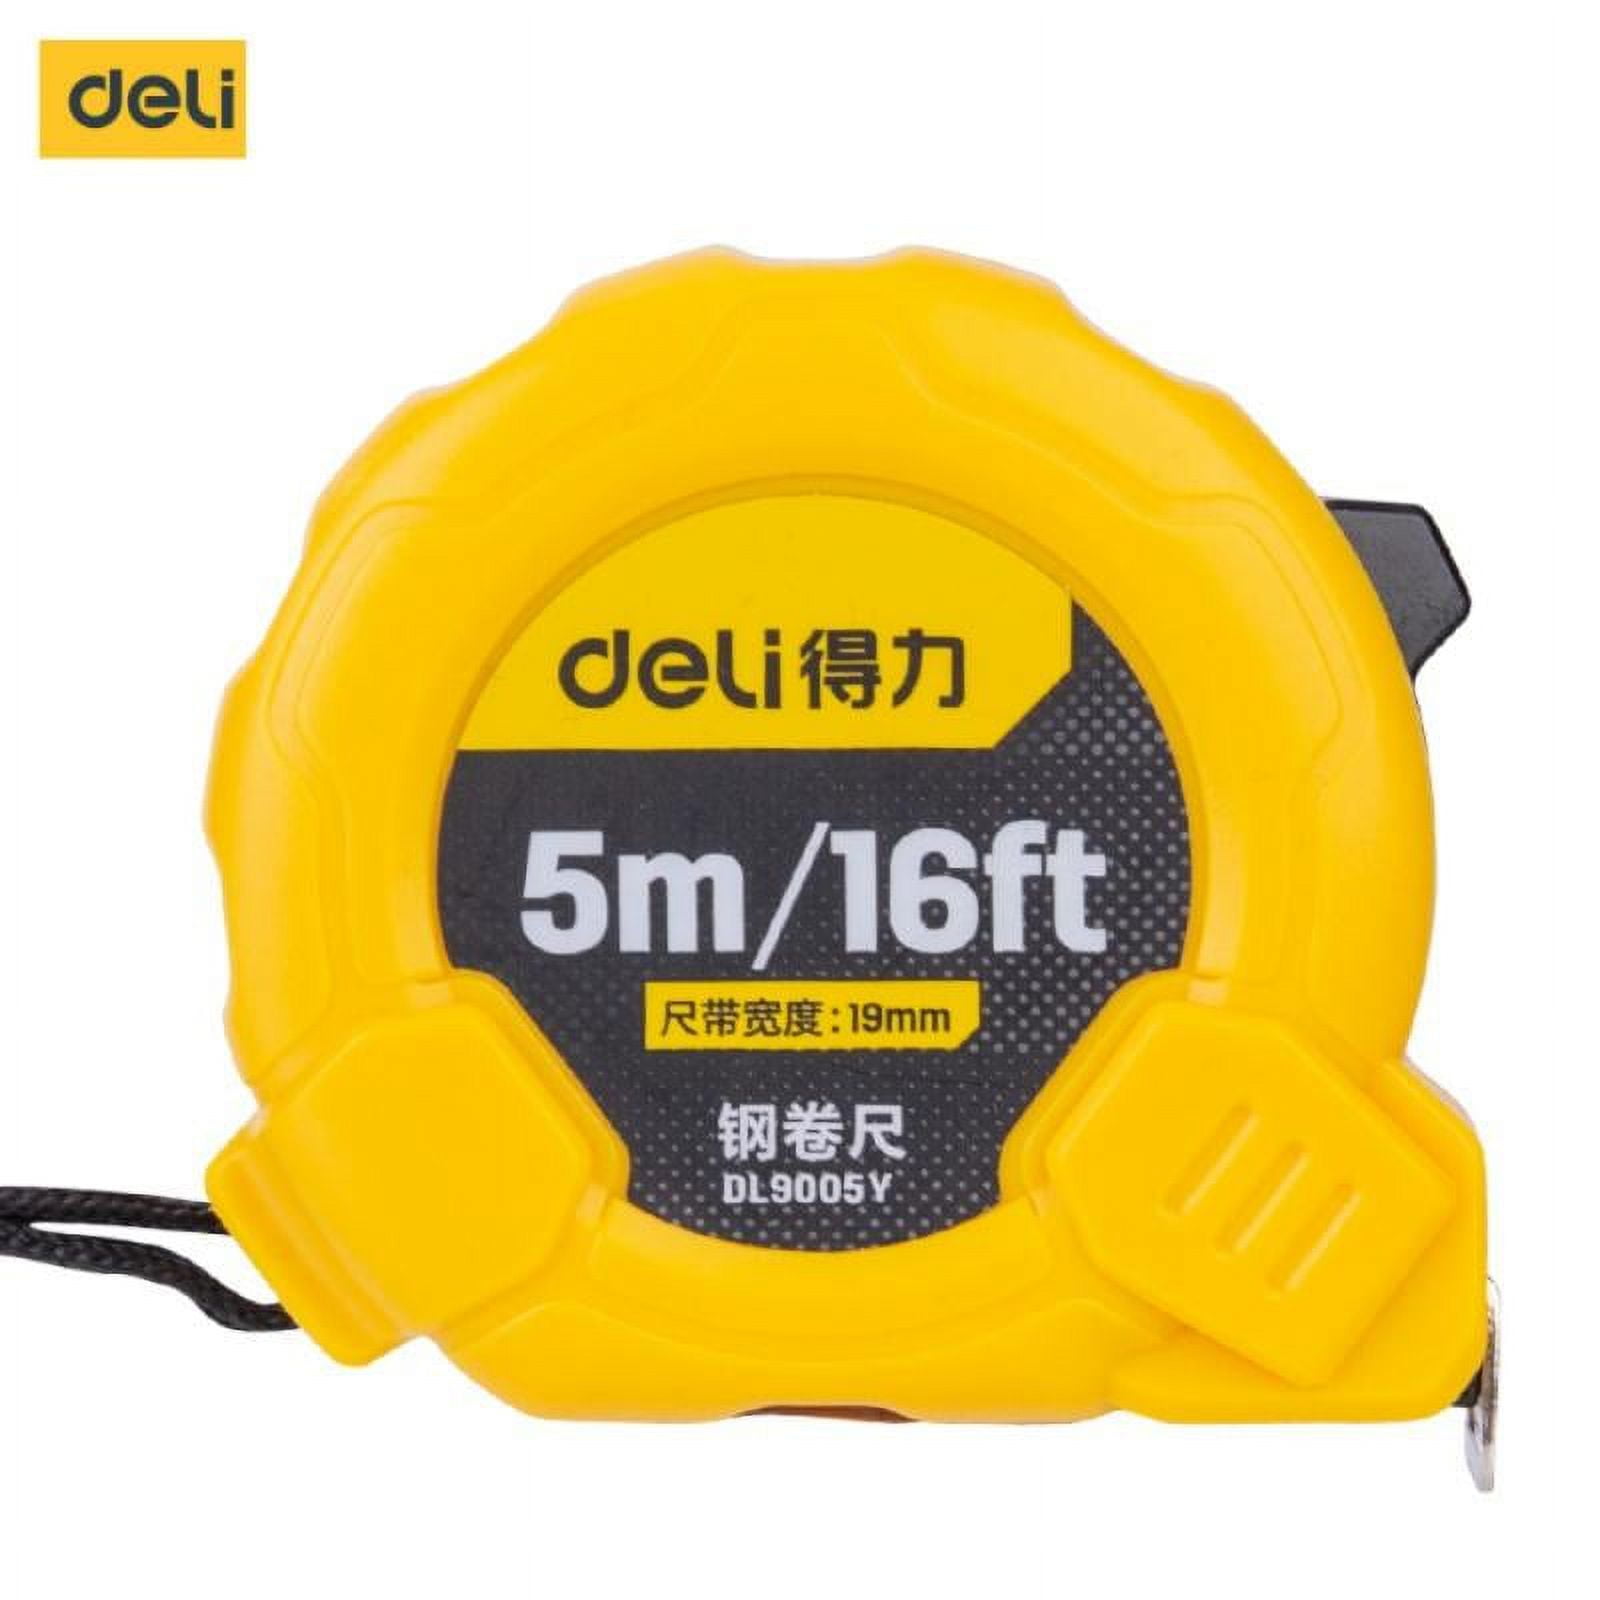 1pc 60 Inch Plastic Measuring Tape, Modern Band Tape For Home